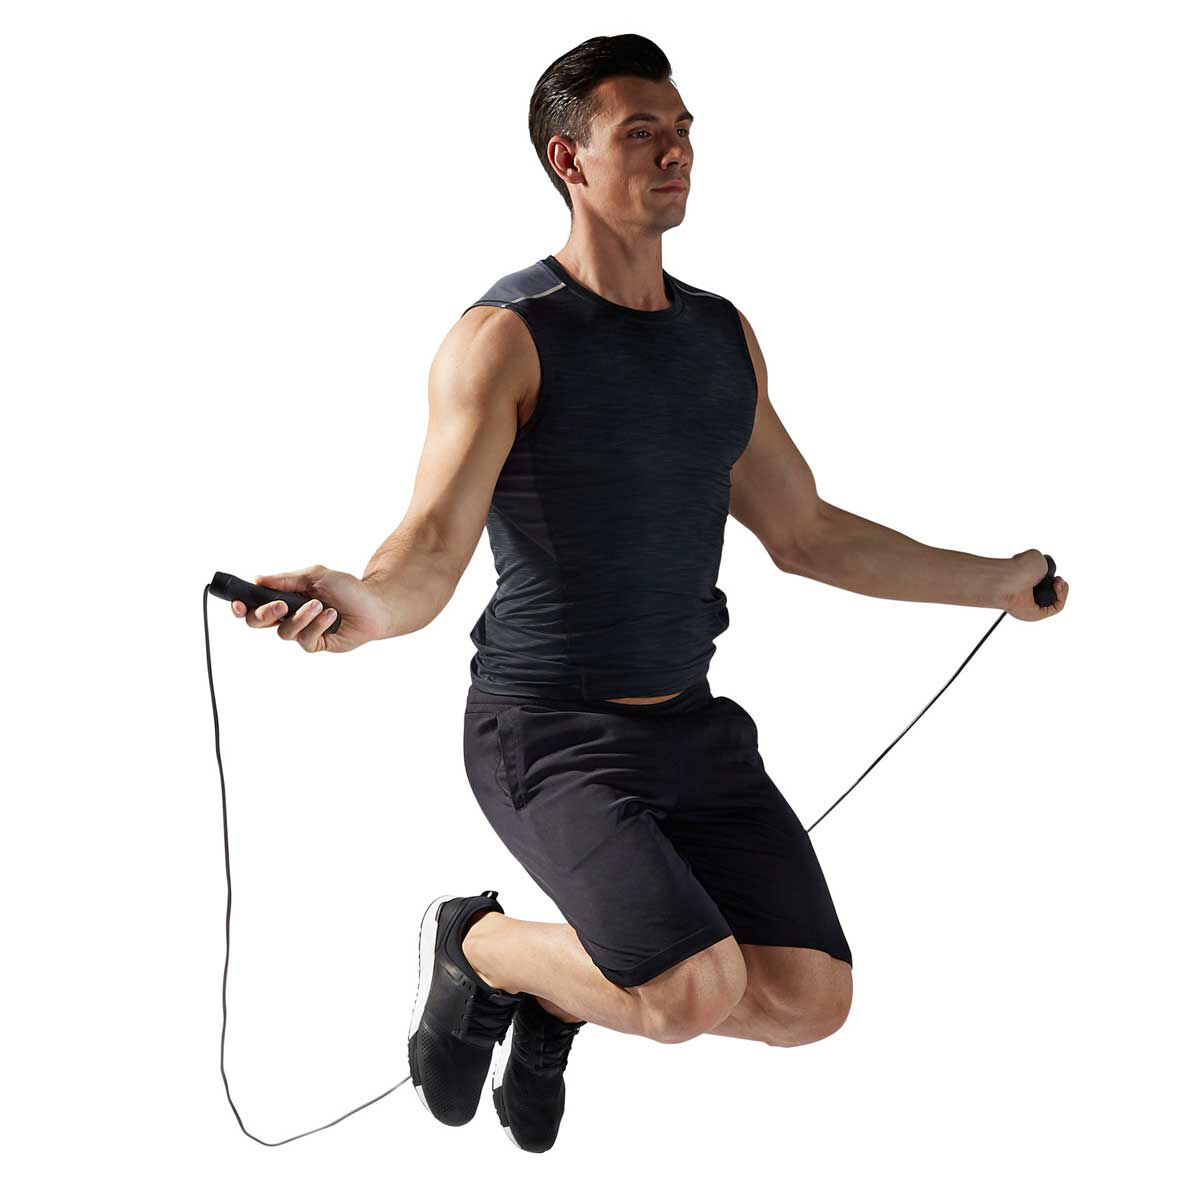 How to size your jump rope to find the perfect fitjump rope